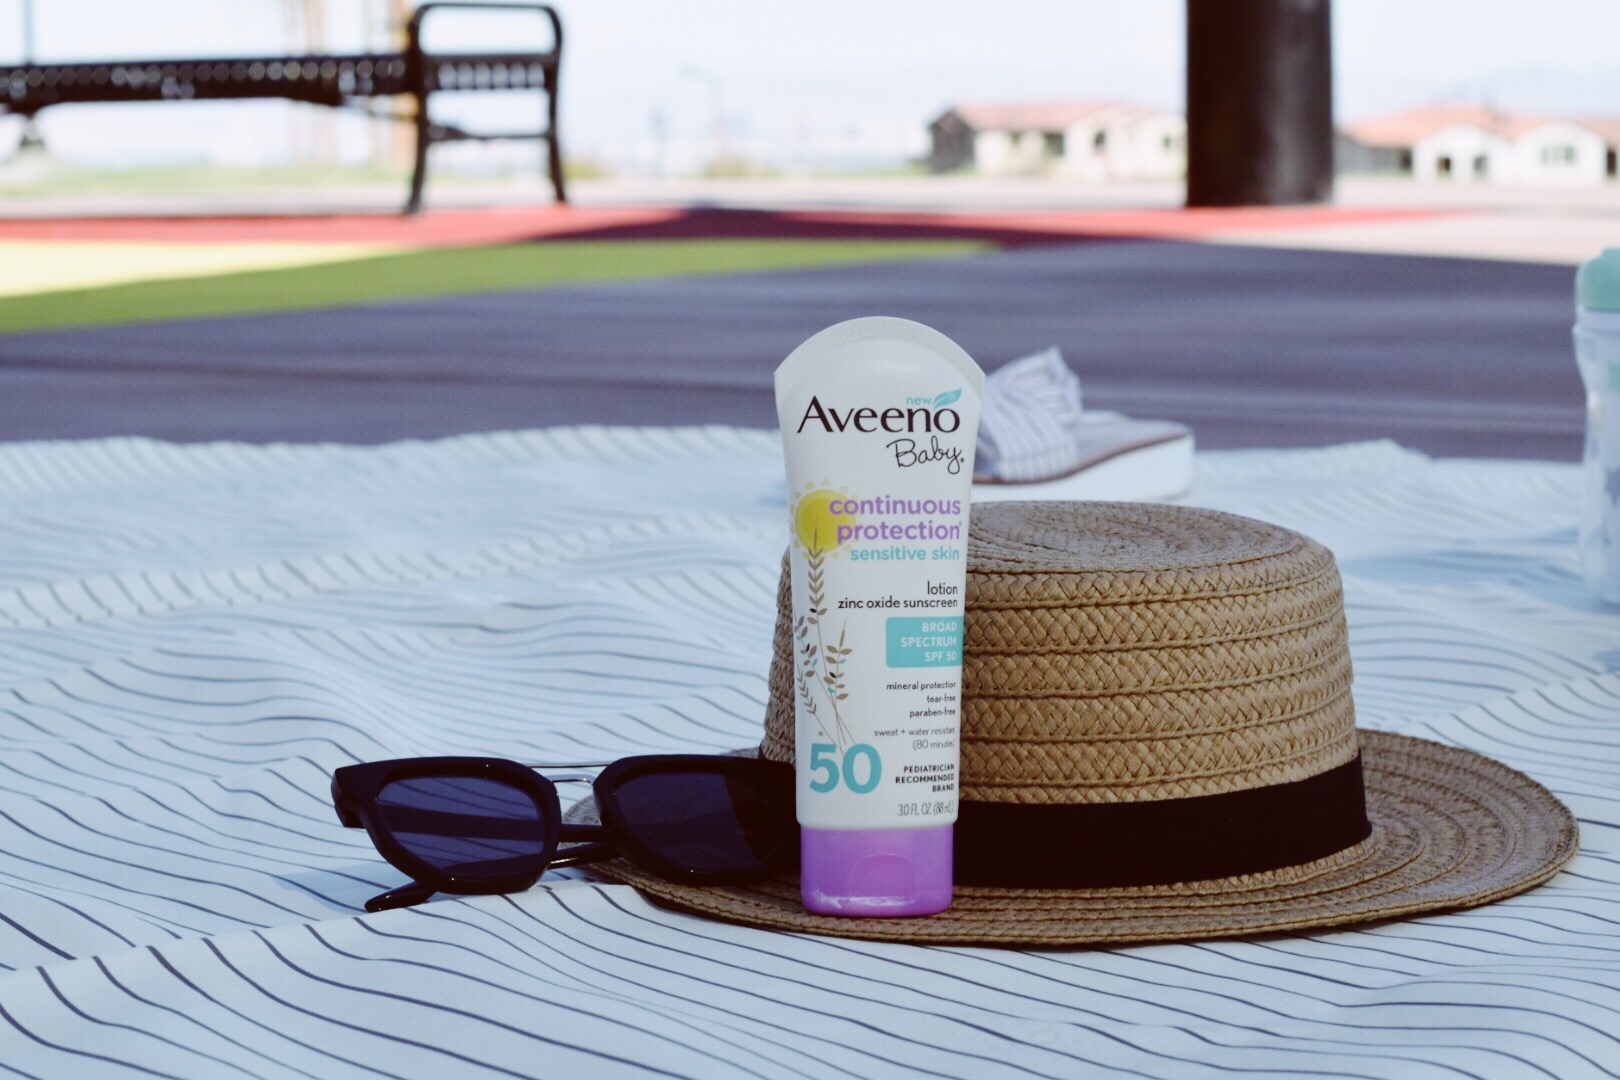 Best Baby Sunscreen featured by Las Vegas lifestyle blogger, Outfits & Outings